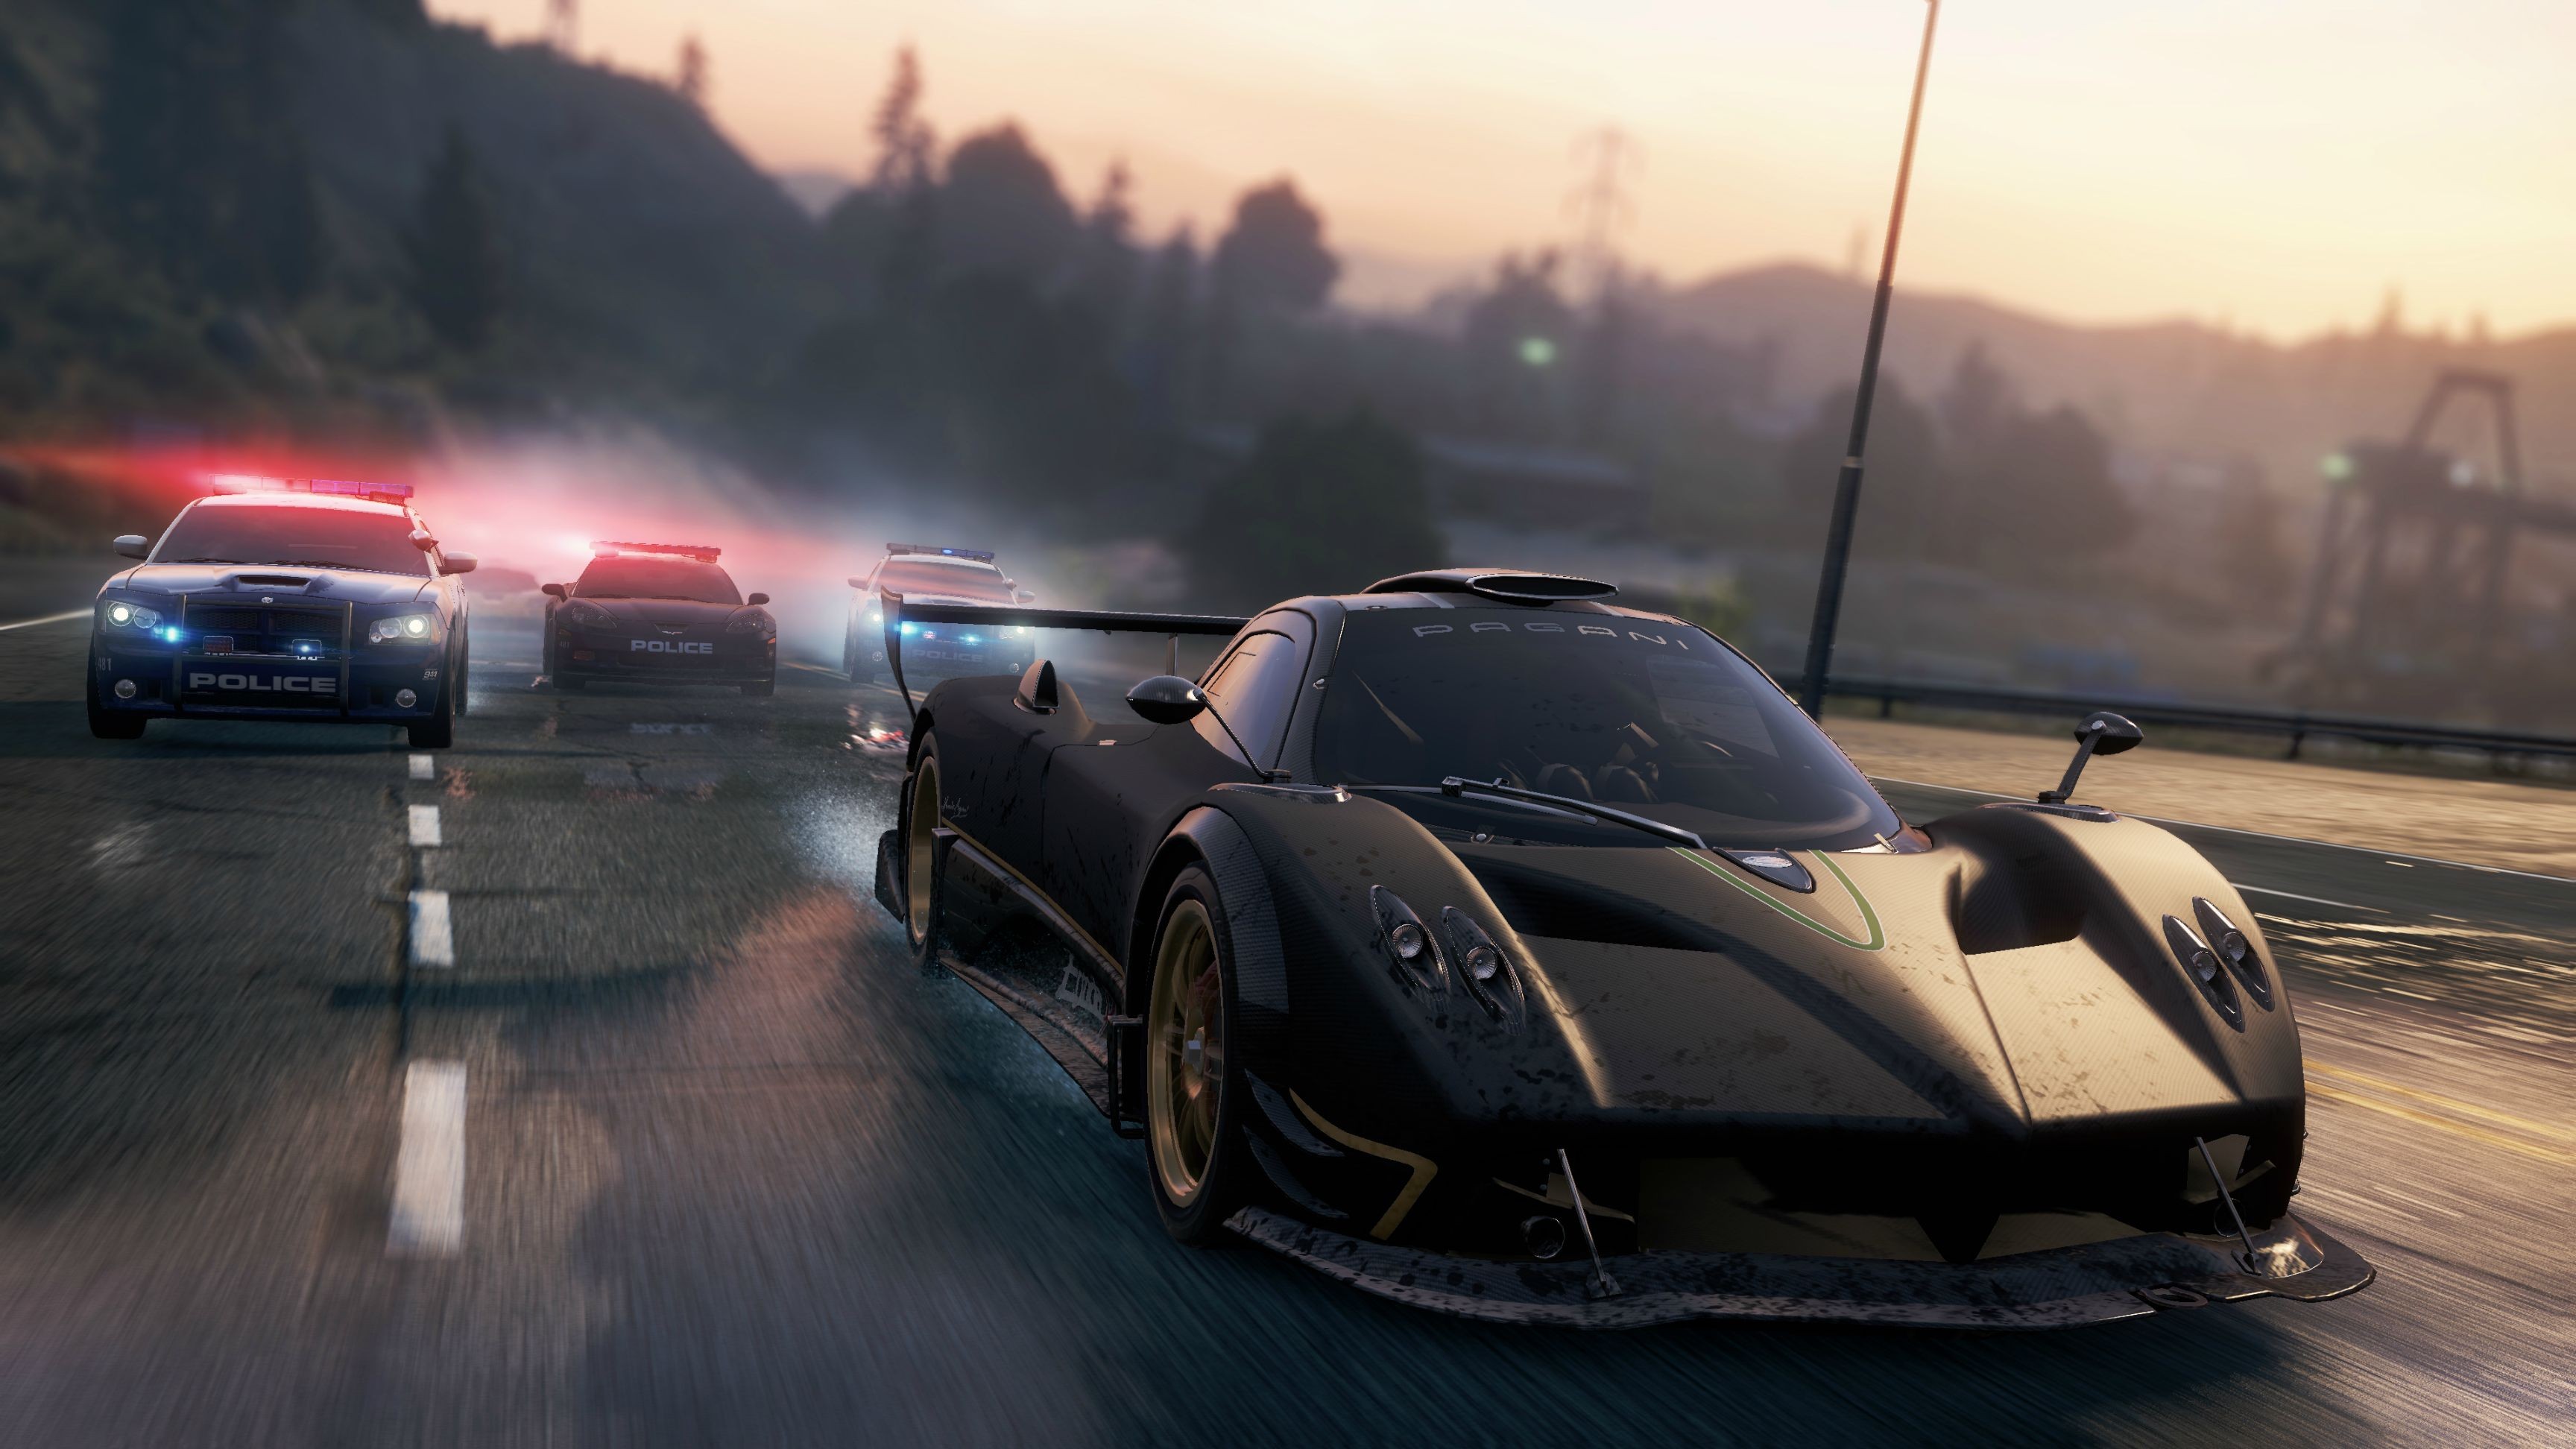 Need for speed wanted game. NFS most wanted 2012. Нфс most wanted 2012. Pagani Zonda r. Pagani Zonda NFS most wanted.